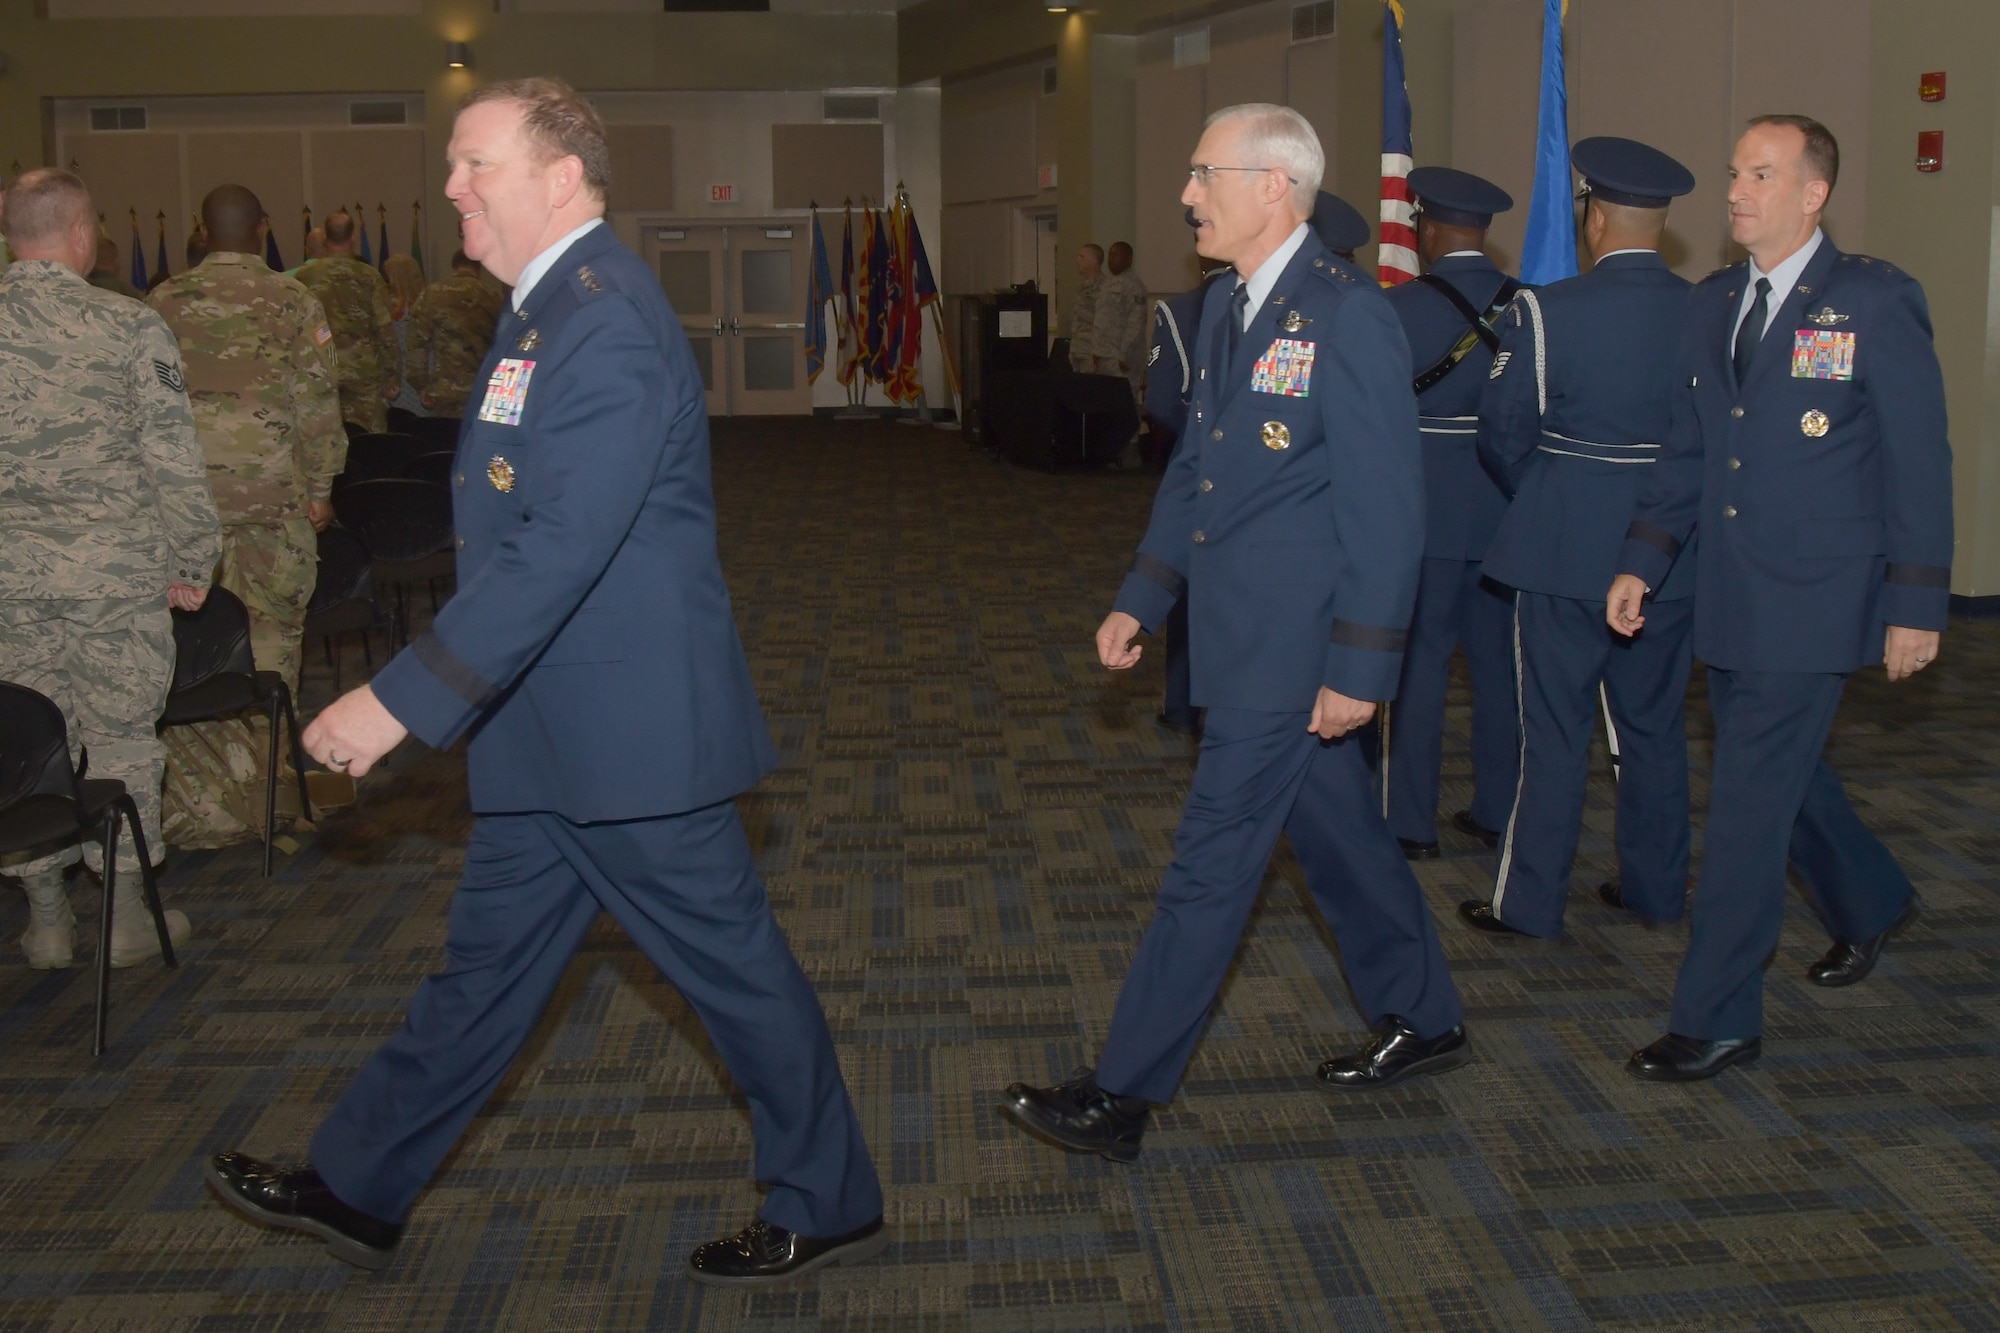 Lt. Gen. Richard W. Scobee, Chief of Air Force Reserve and Air Force Reserve commander, Maj. Gen. Craig L. La Fave, outgoing commander of the 22nd Air Force and Maj. Gen. John P. Healy, incoming commander of the 22nd Air Force, enter a change of command ceremony, July 23, 2019.